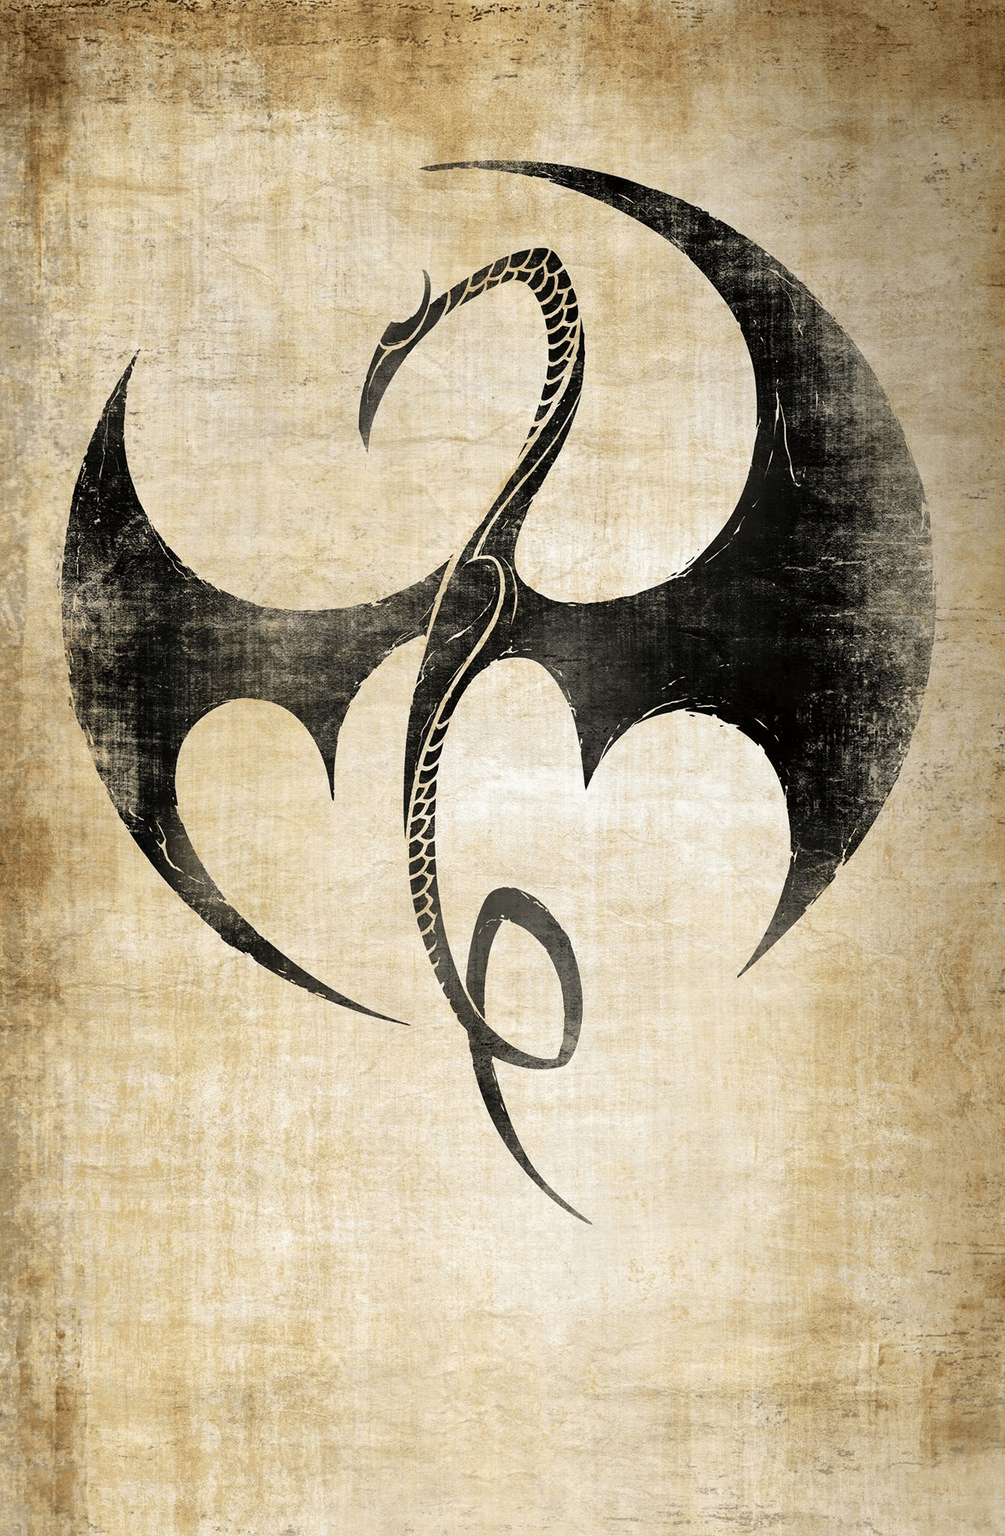 mobileTextless poster for Netflix's Iron Fist Credit to u